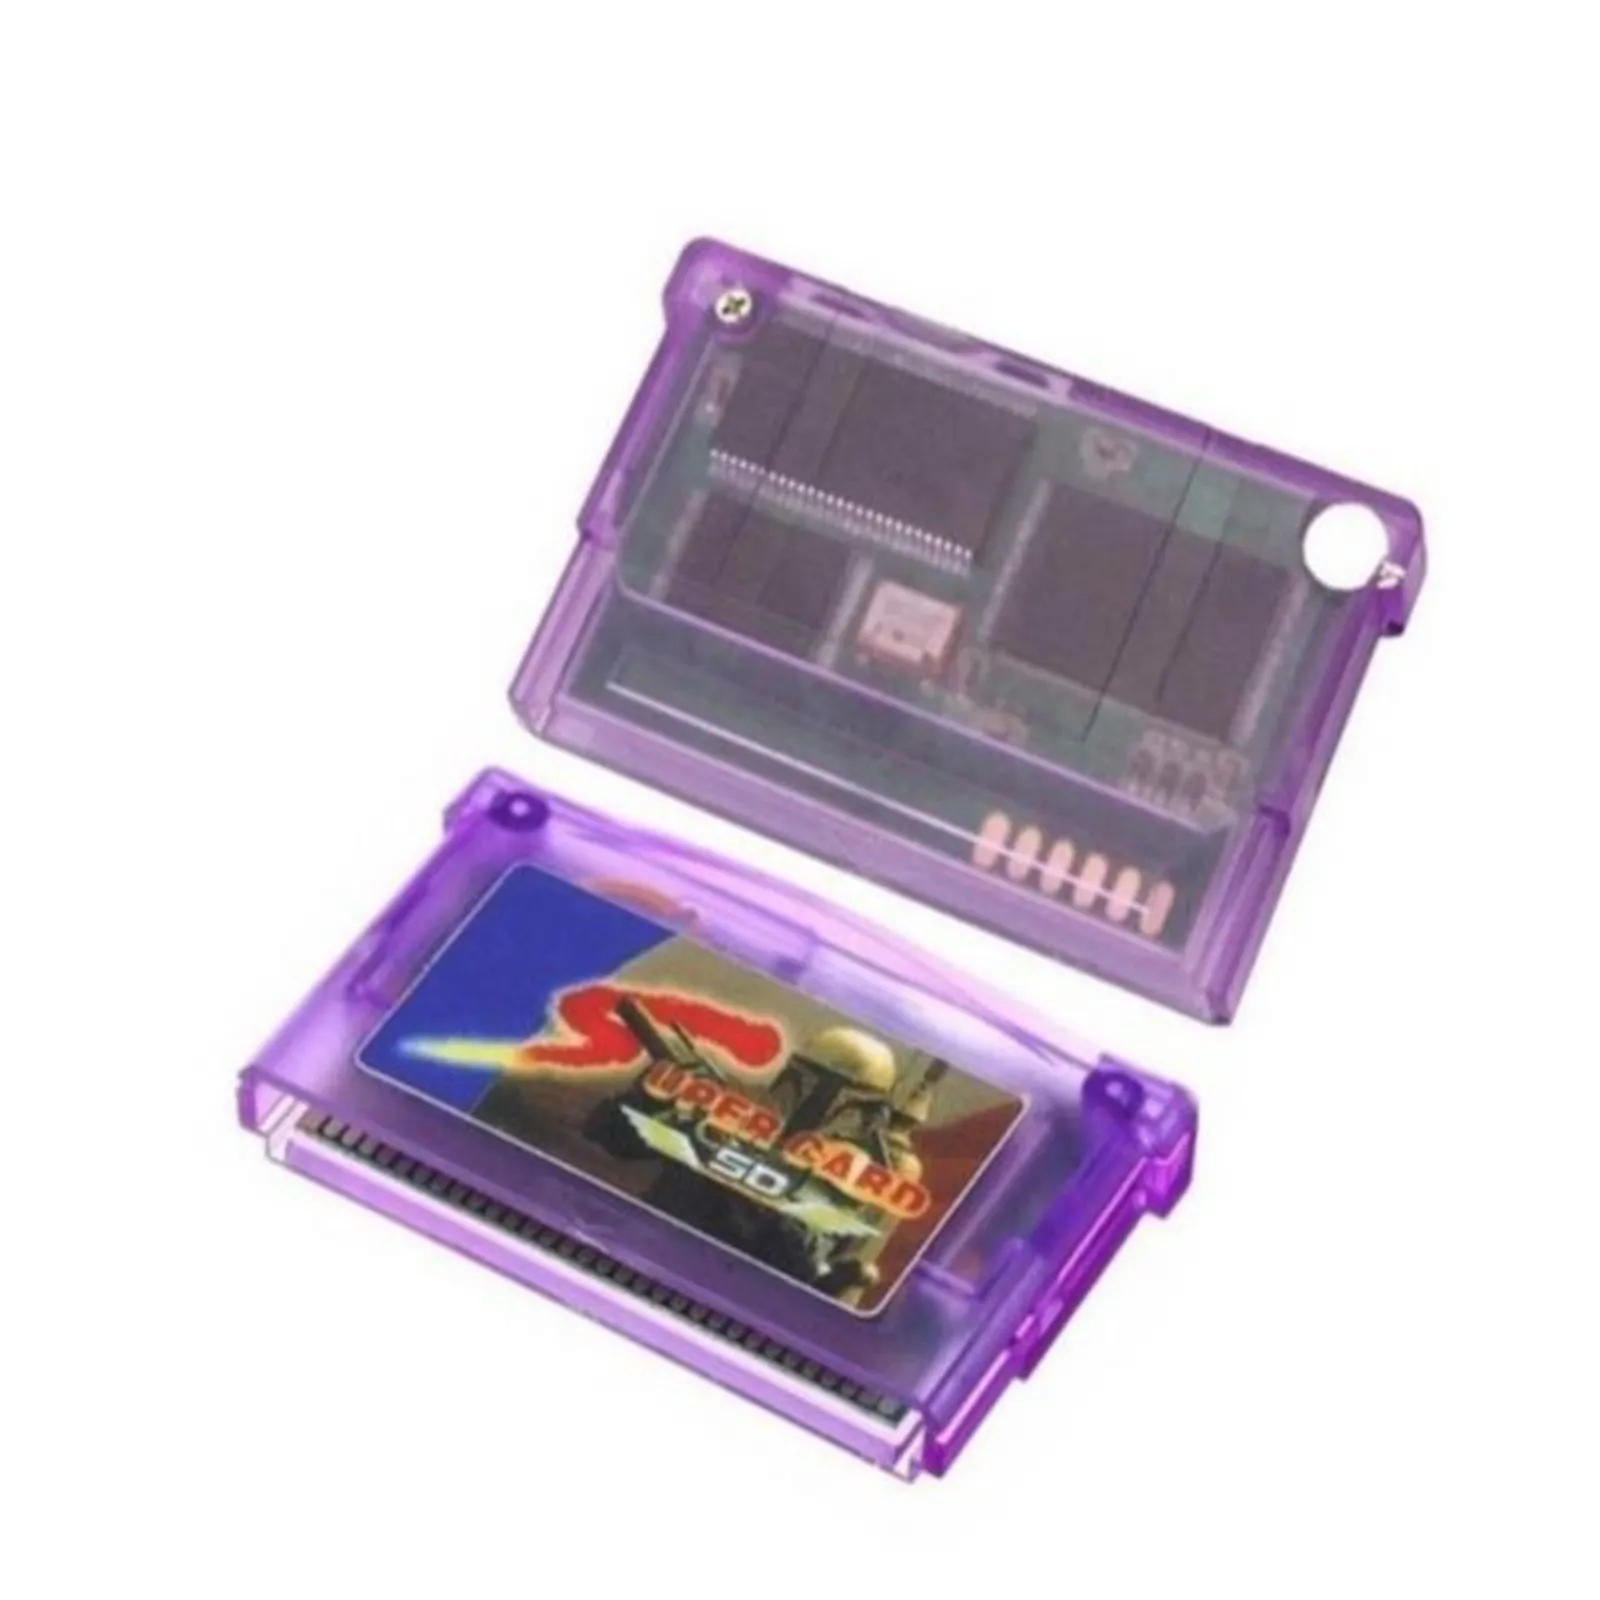 

For GameBoy Advance Game Cartridge for GBA/GBASP/GBM/IDS/NDS/NDSL Super Card Game Console Memory